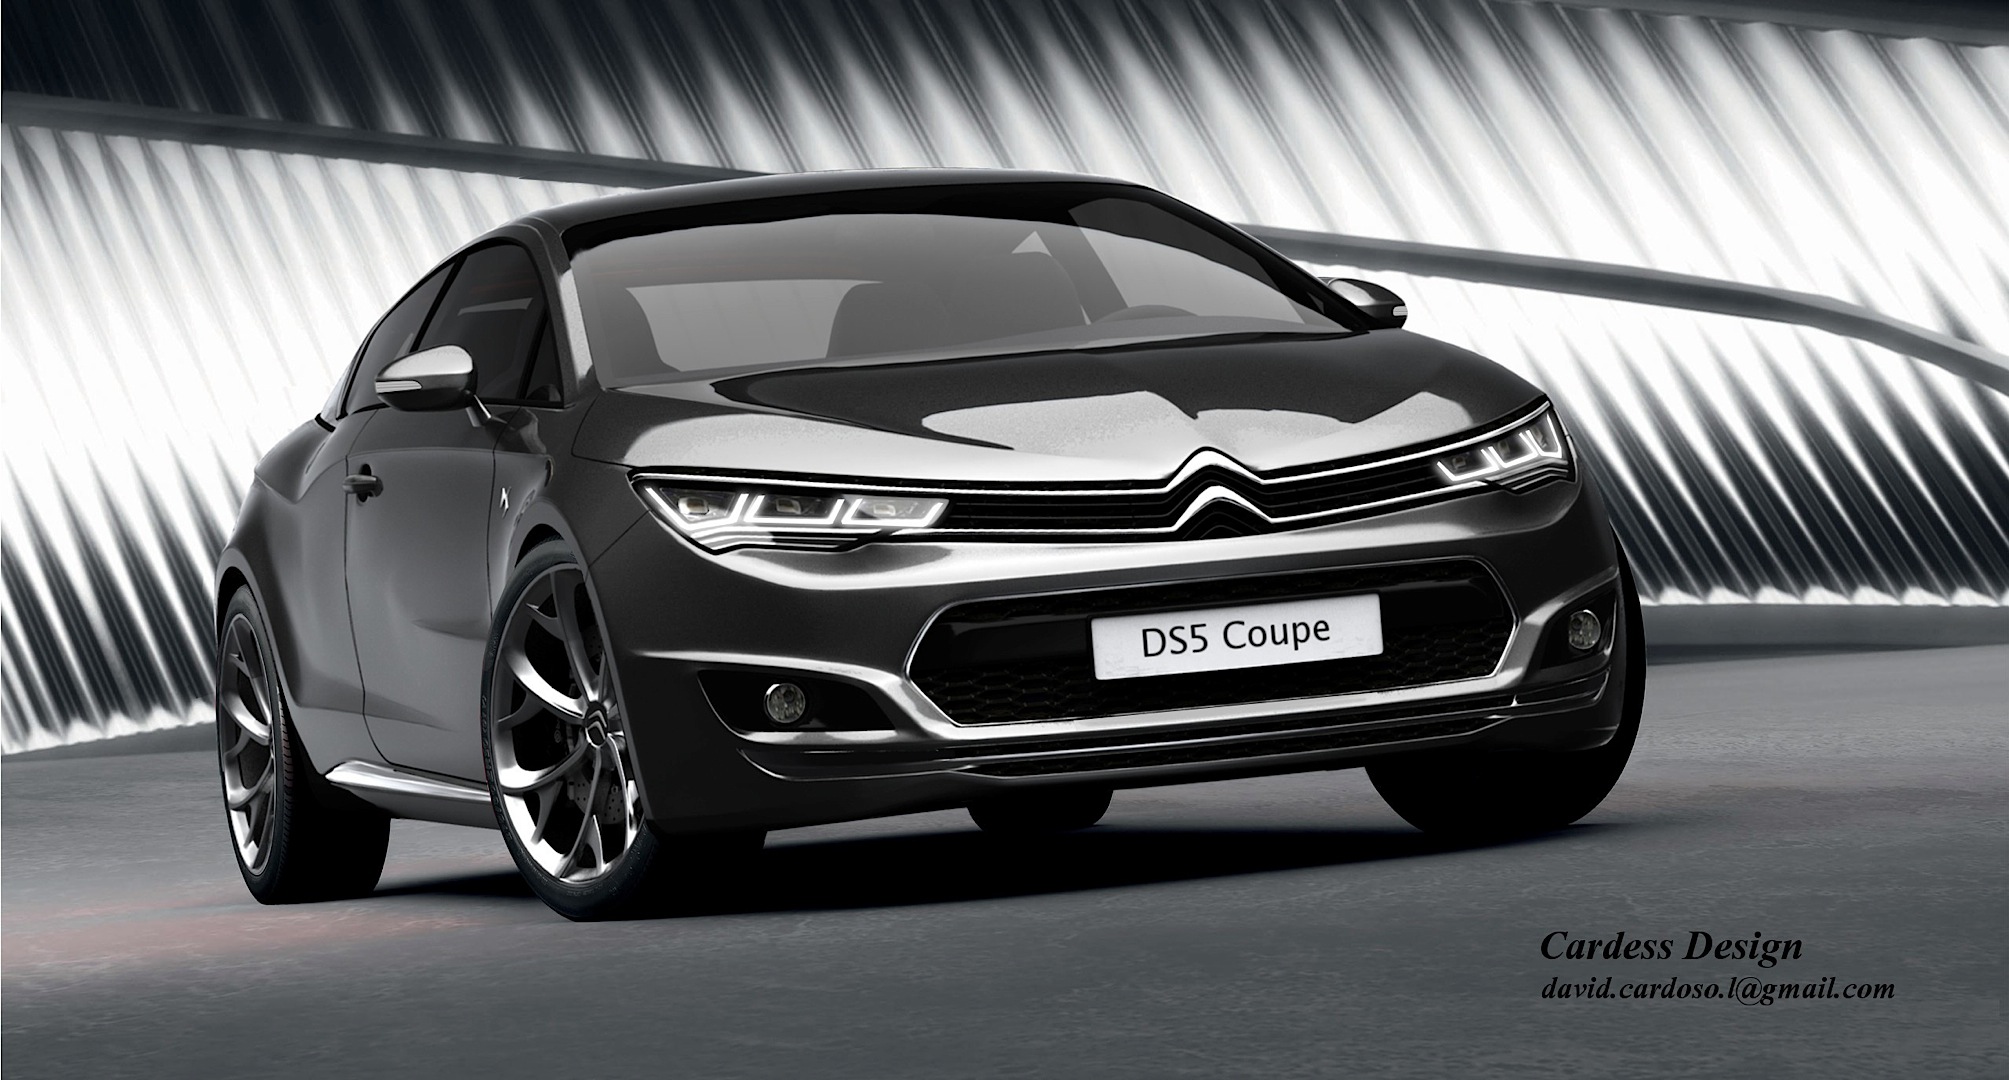 citroen-ds5-coupe-imagined-by-david-cardoso_1.jpg